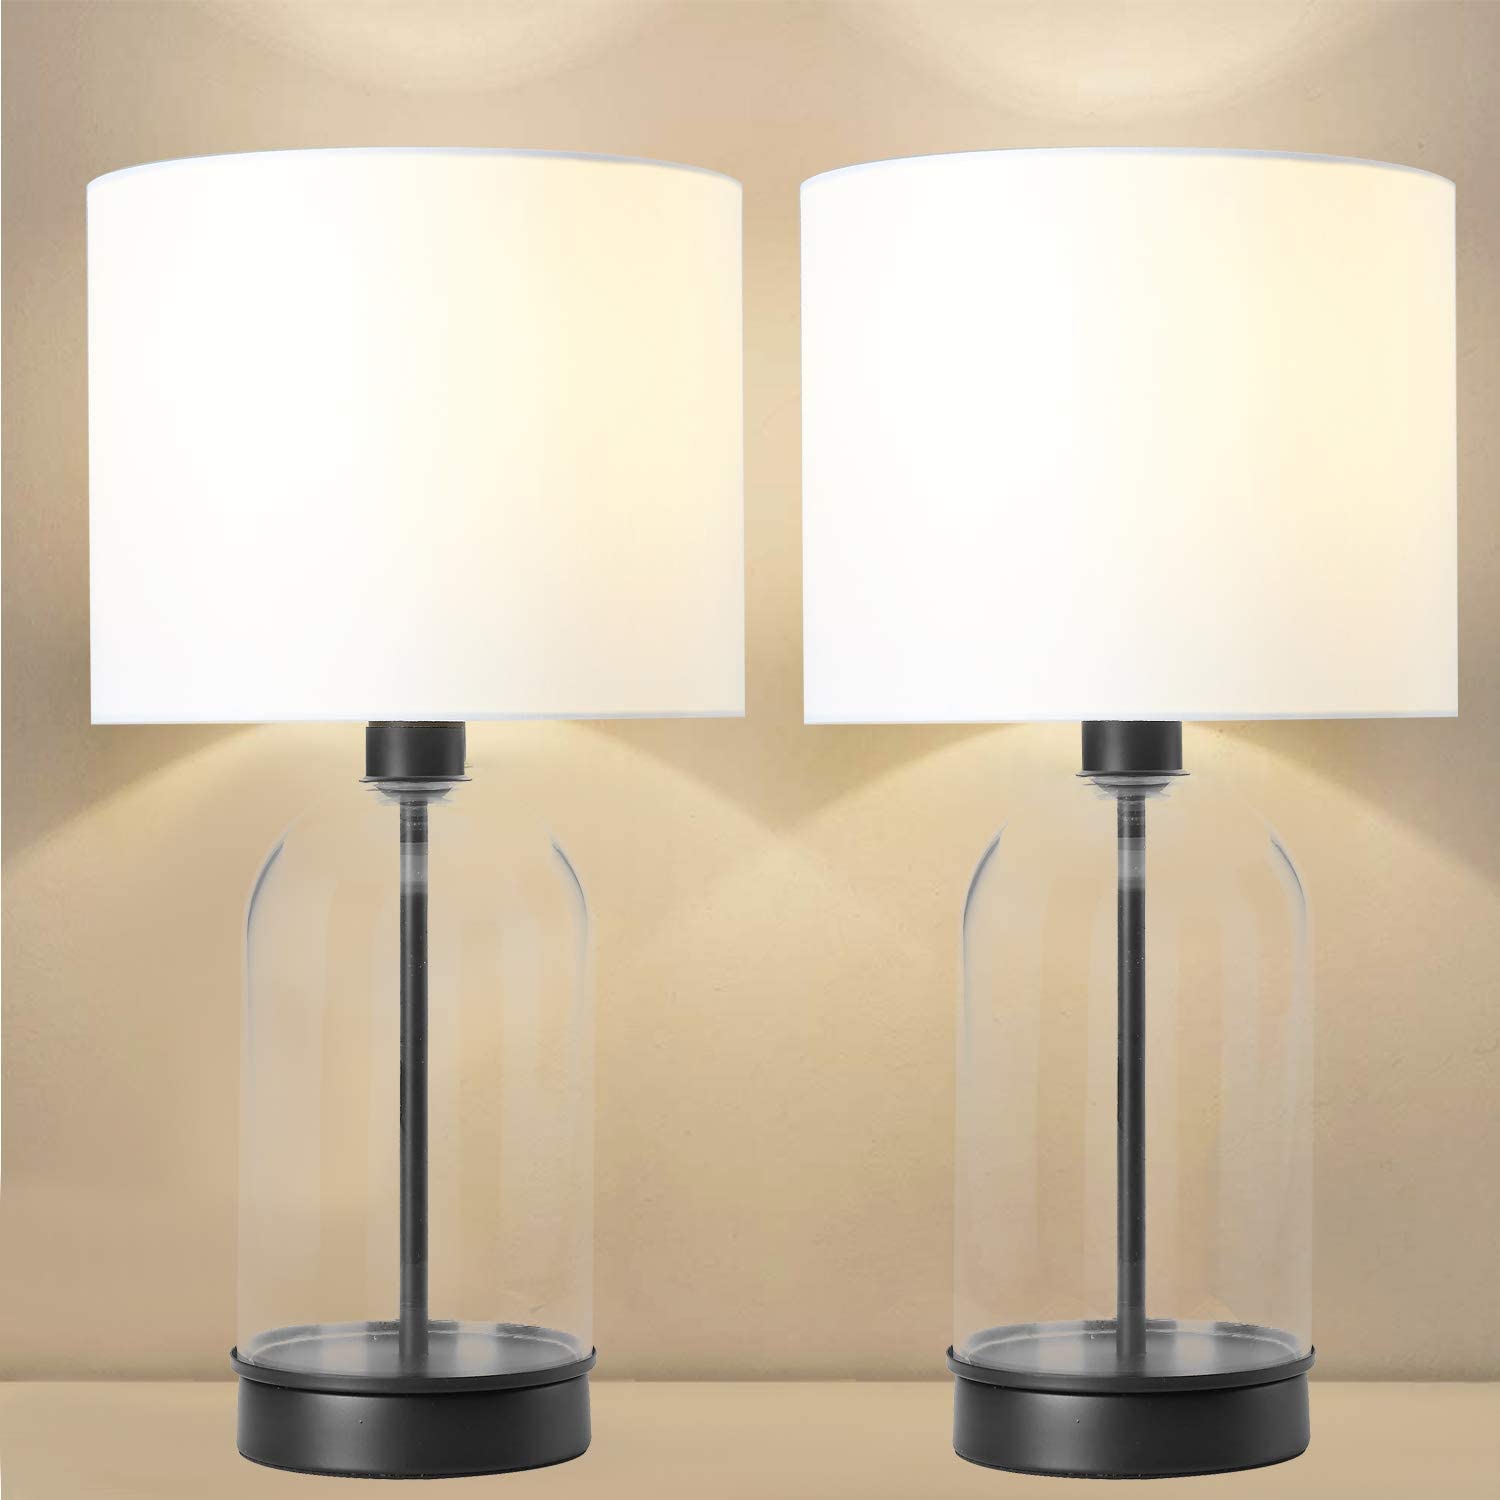 Berliget Modern Black Cylindrical Glass Body Table Lamps, Set Of 2